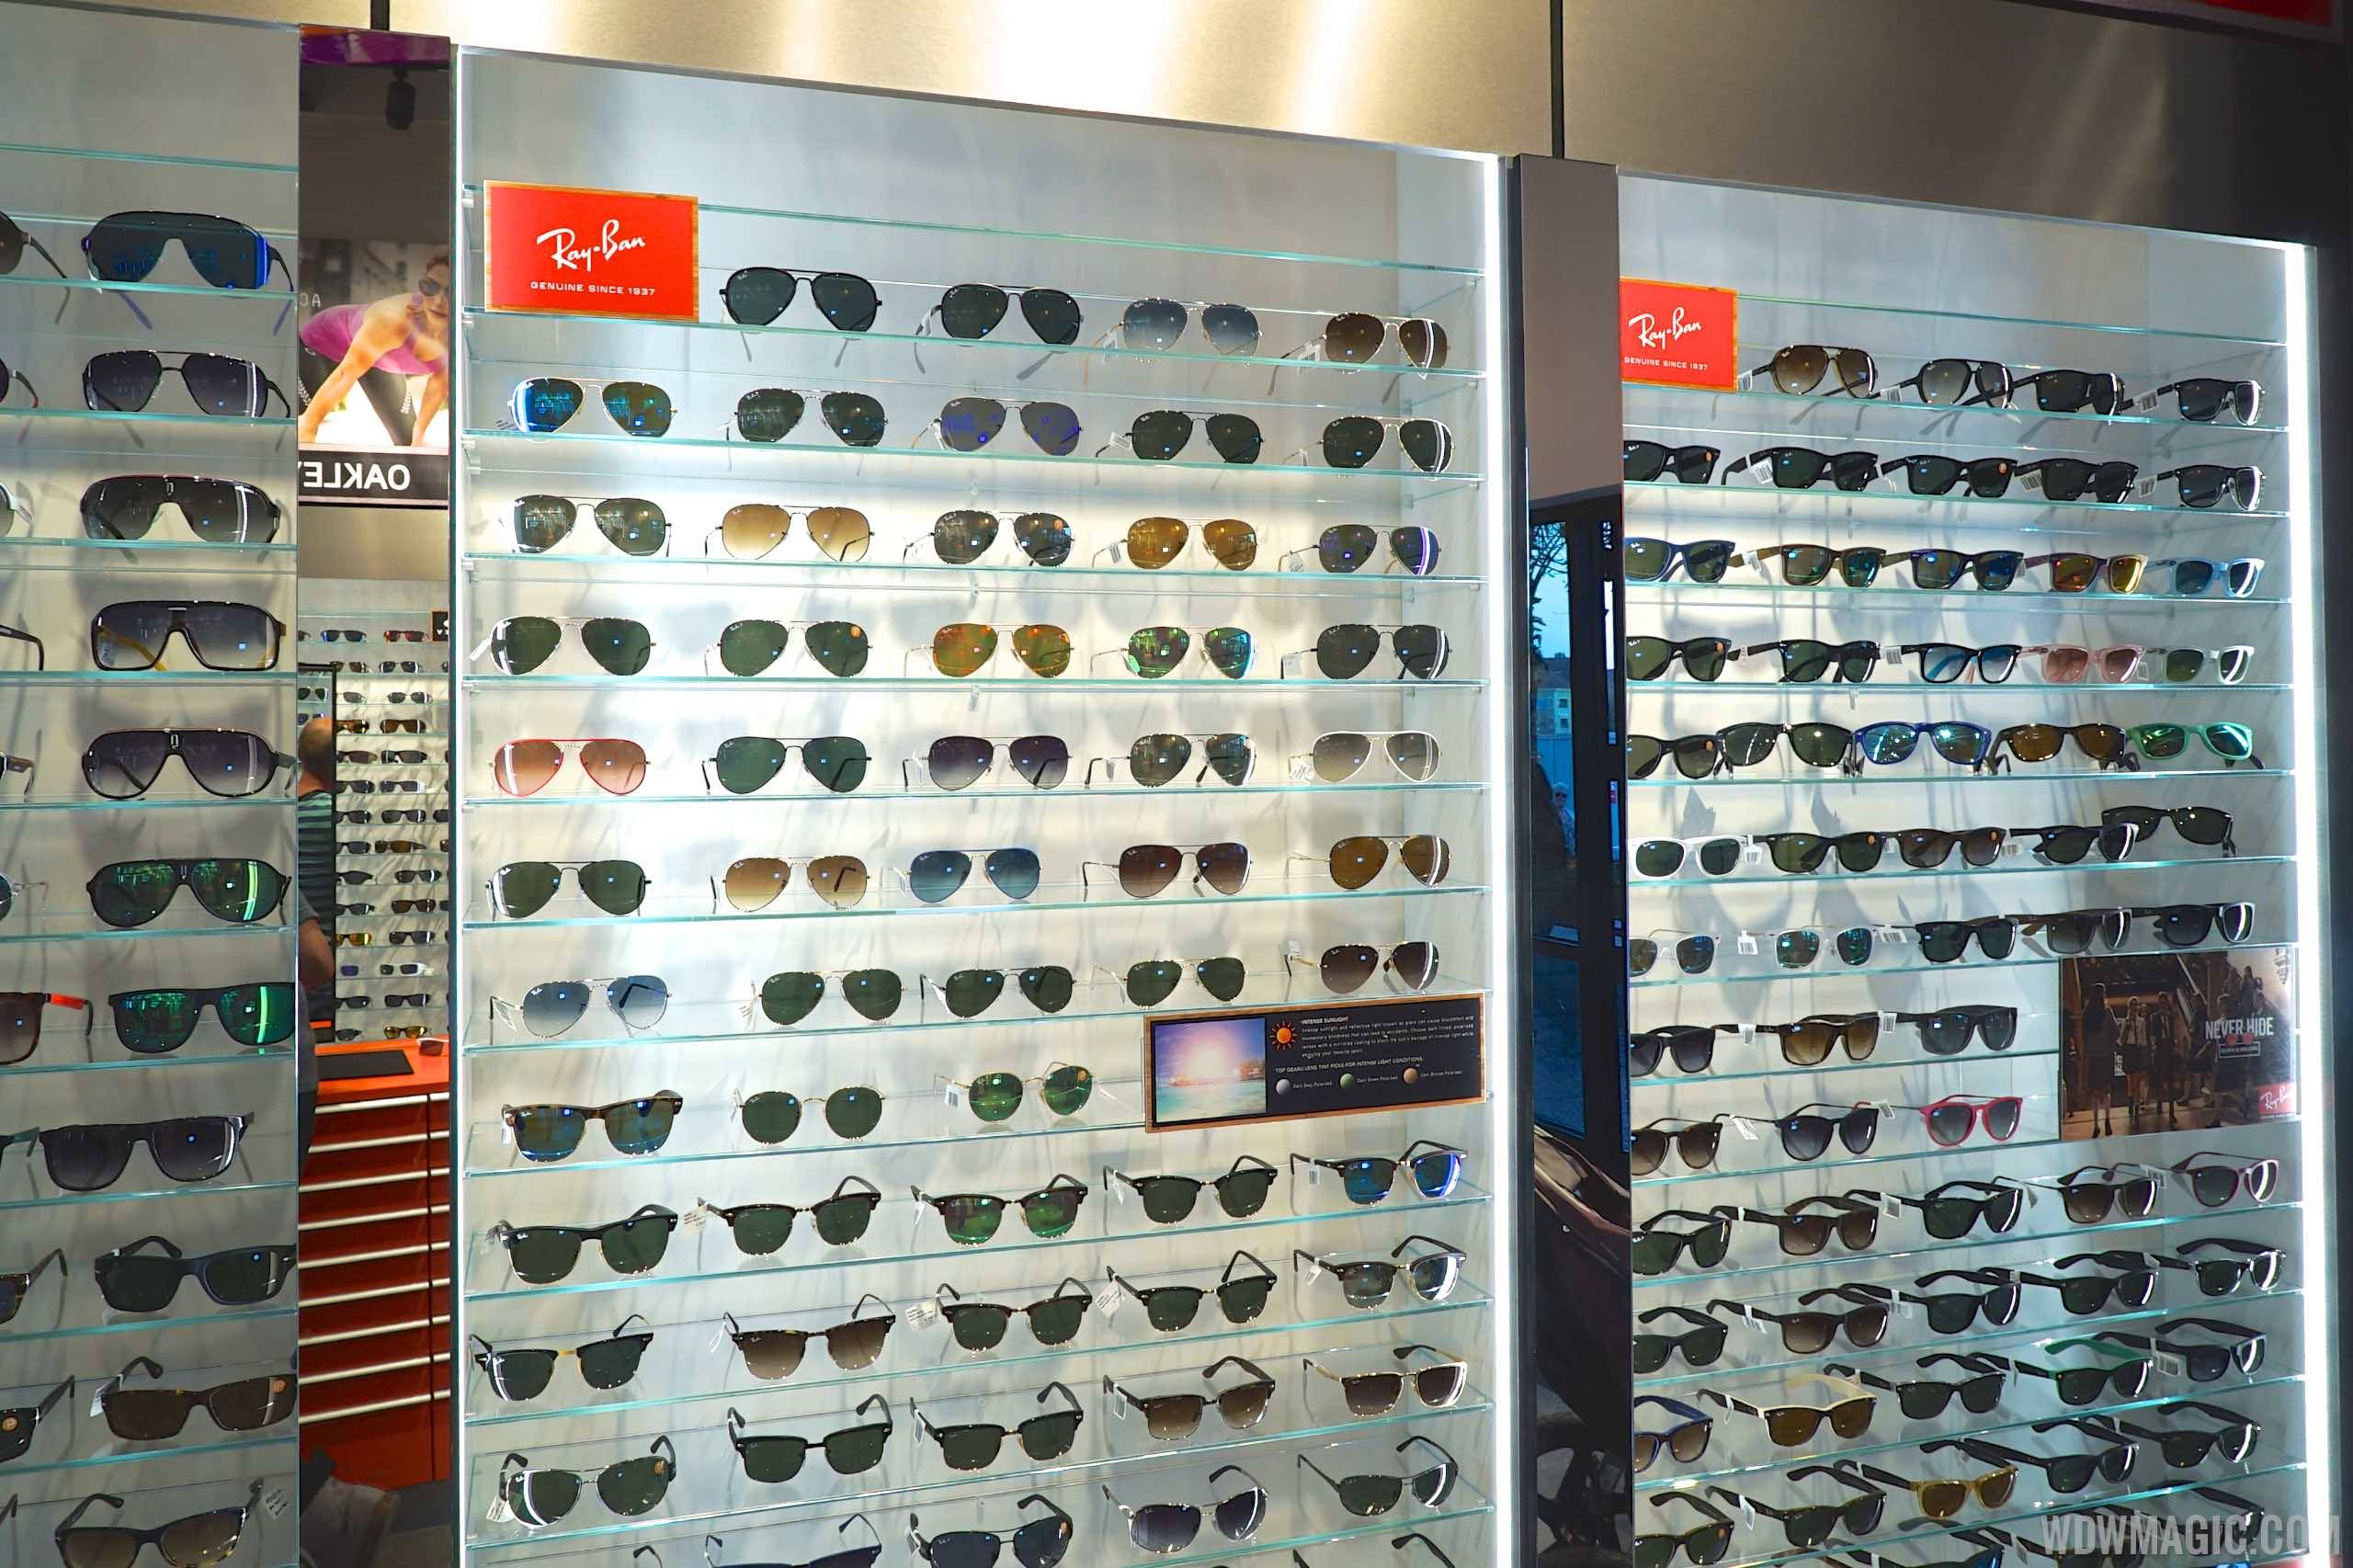 PHOTOS - Inside the new APEX by Sunglass Hut store at The Landing